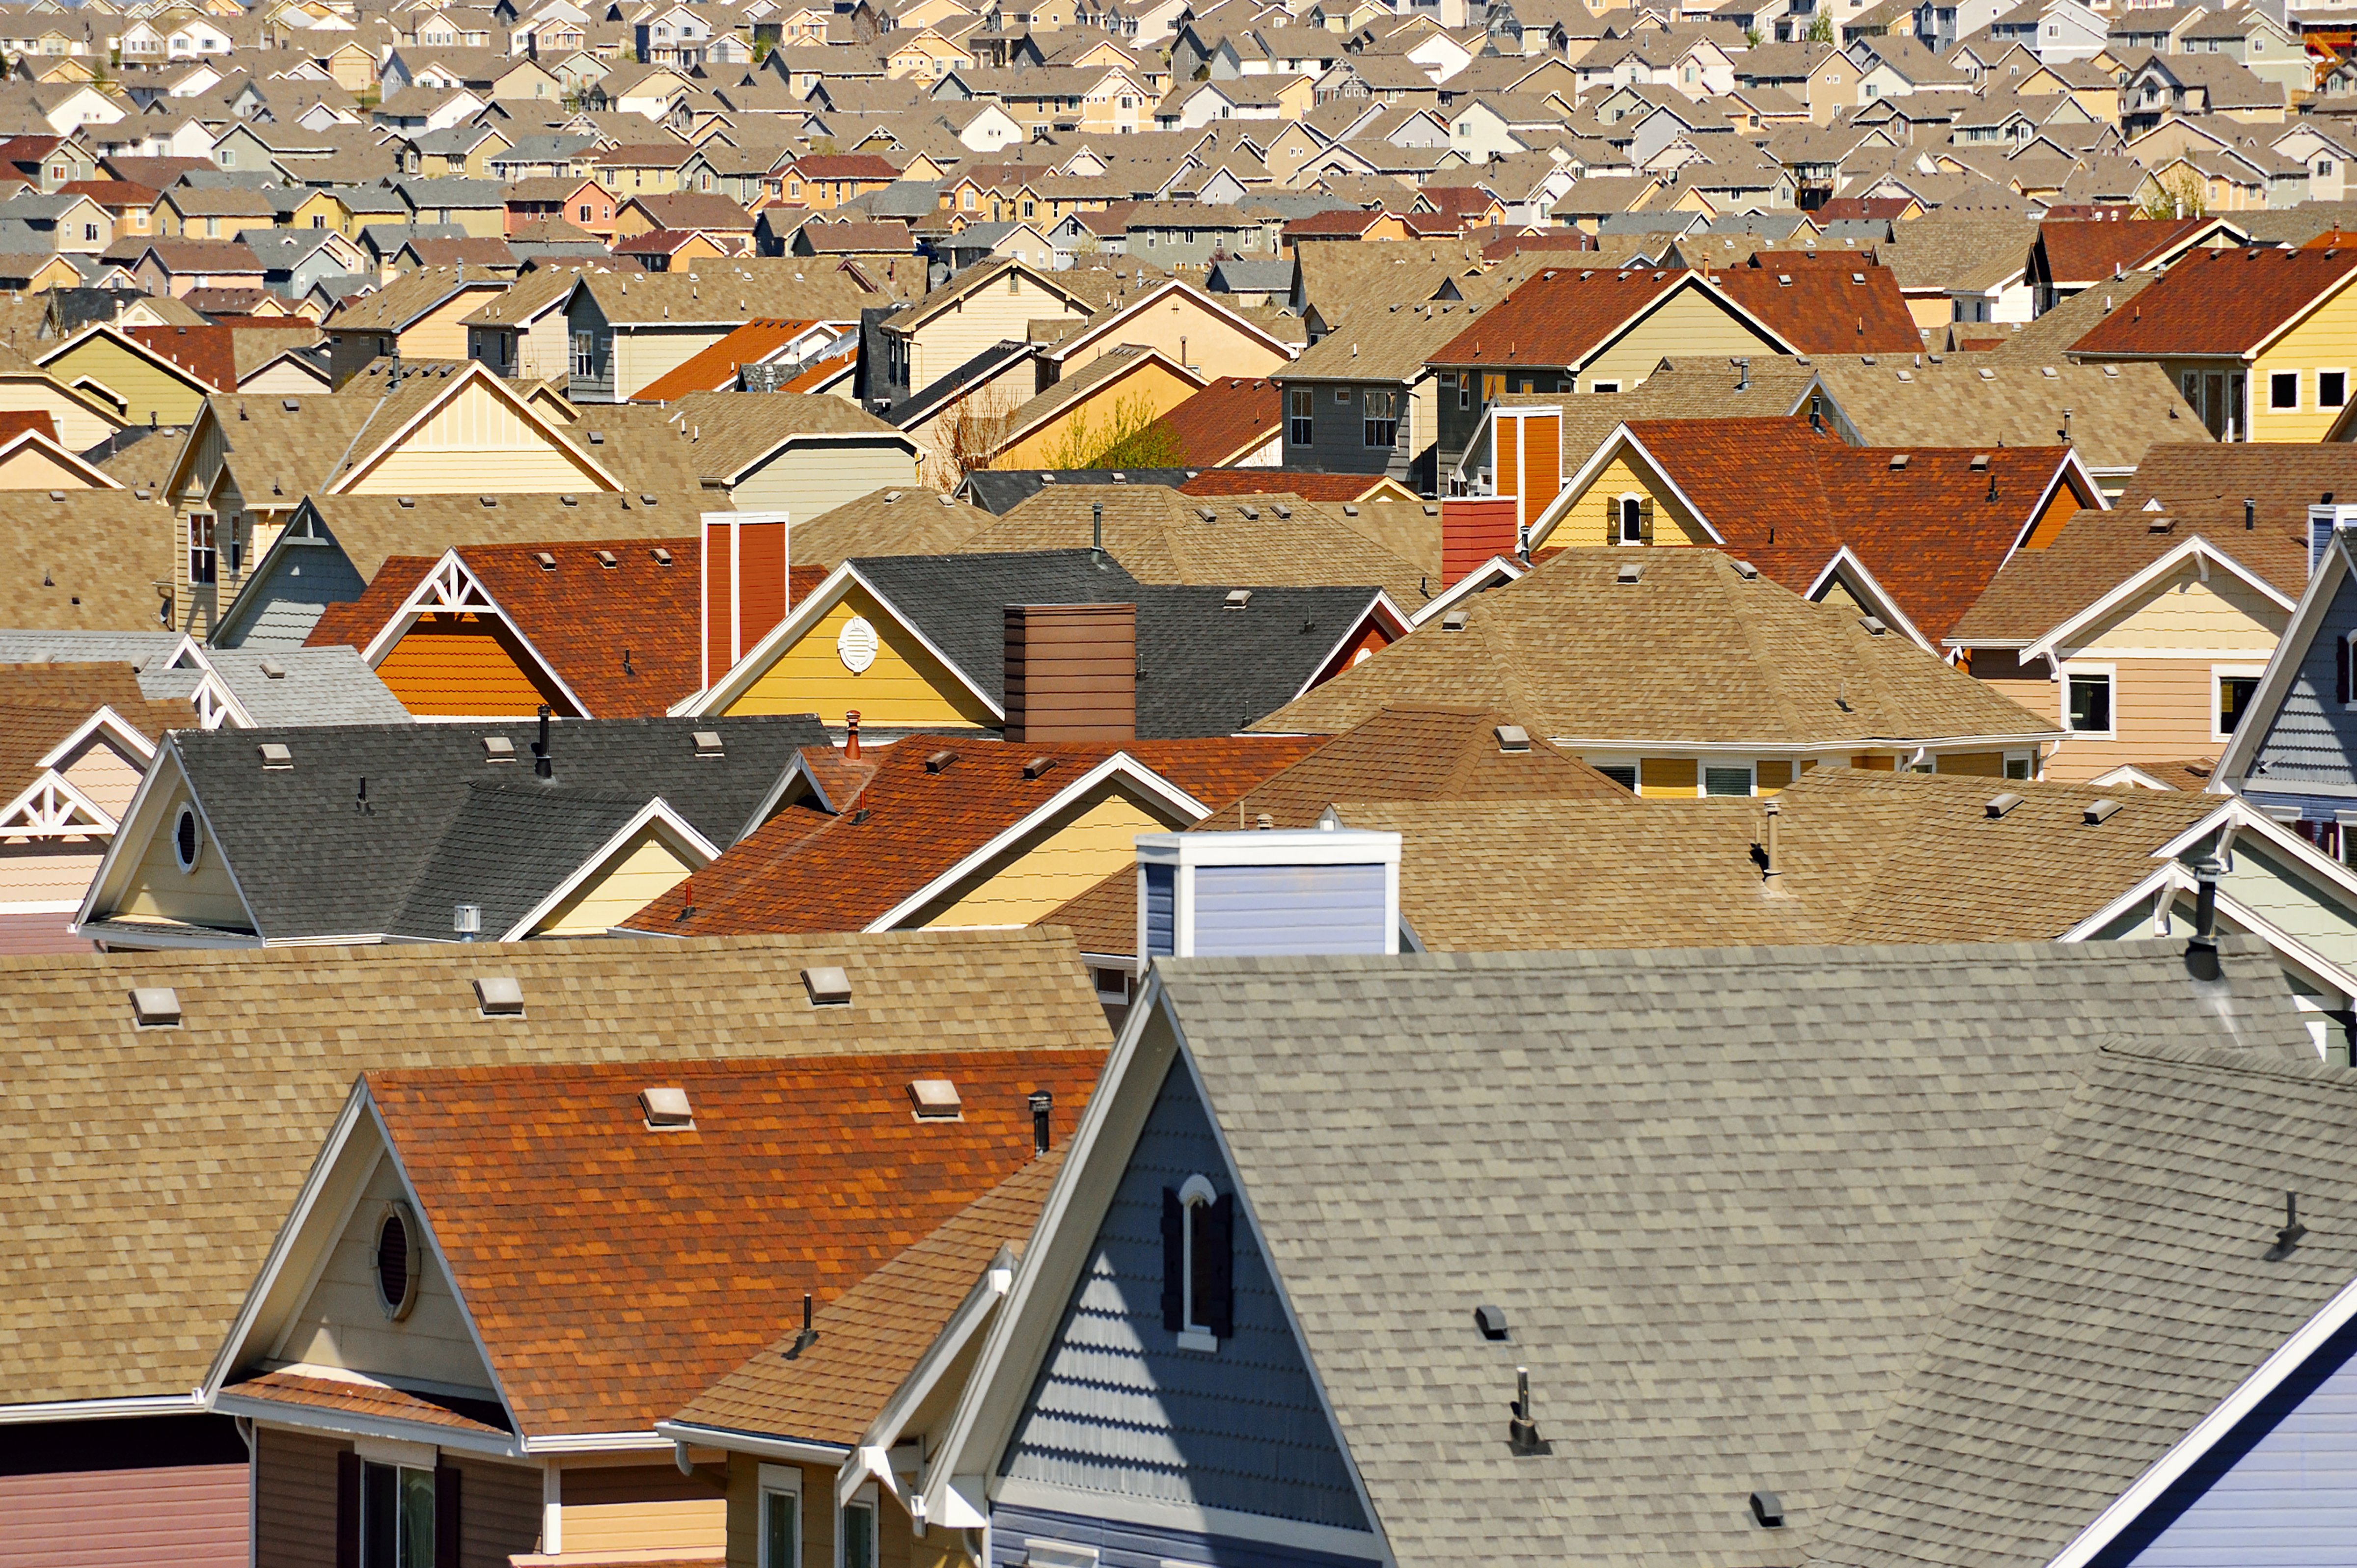 Rooftops in suburban development  in Colorado Springs, Colorado. (Blend Images/Spaces Images/Getty Images)